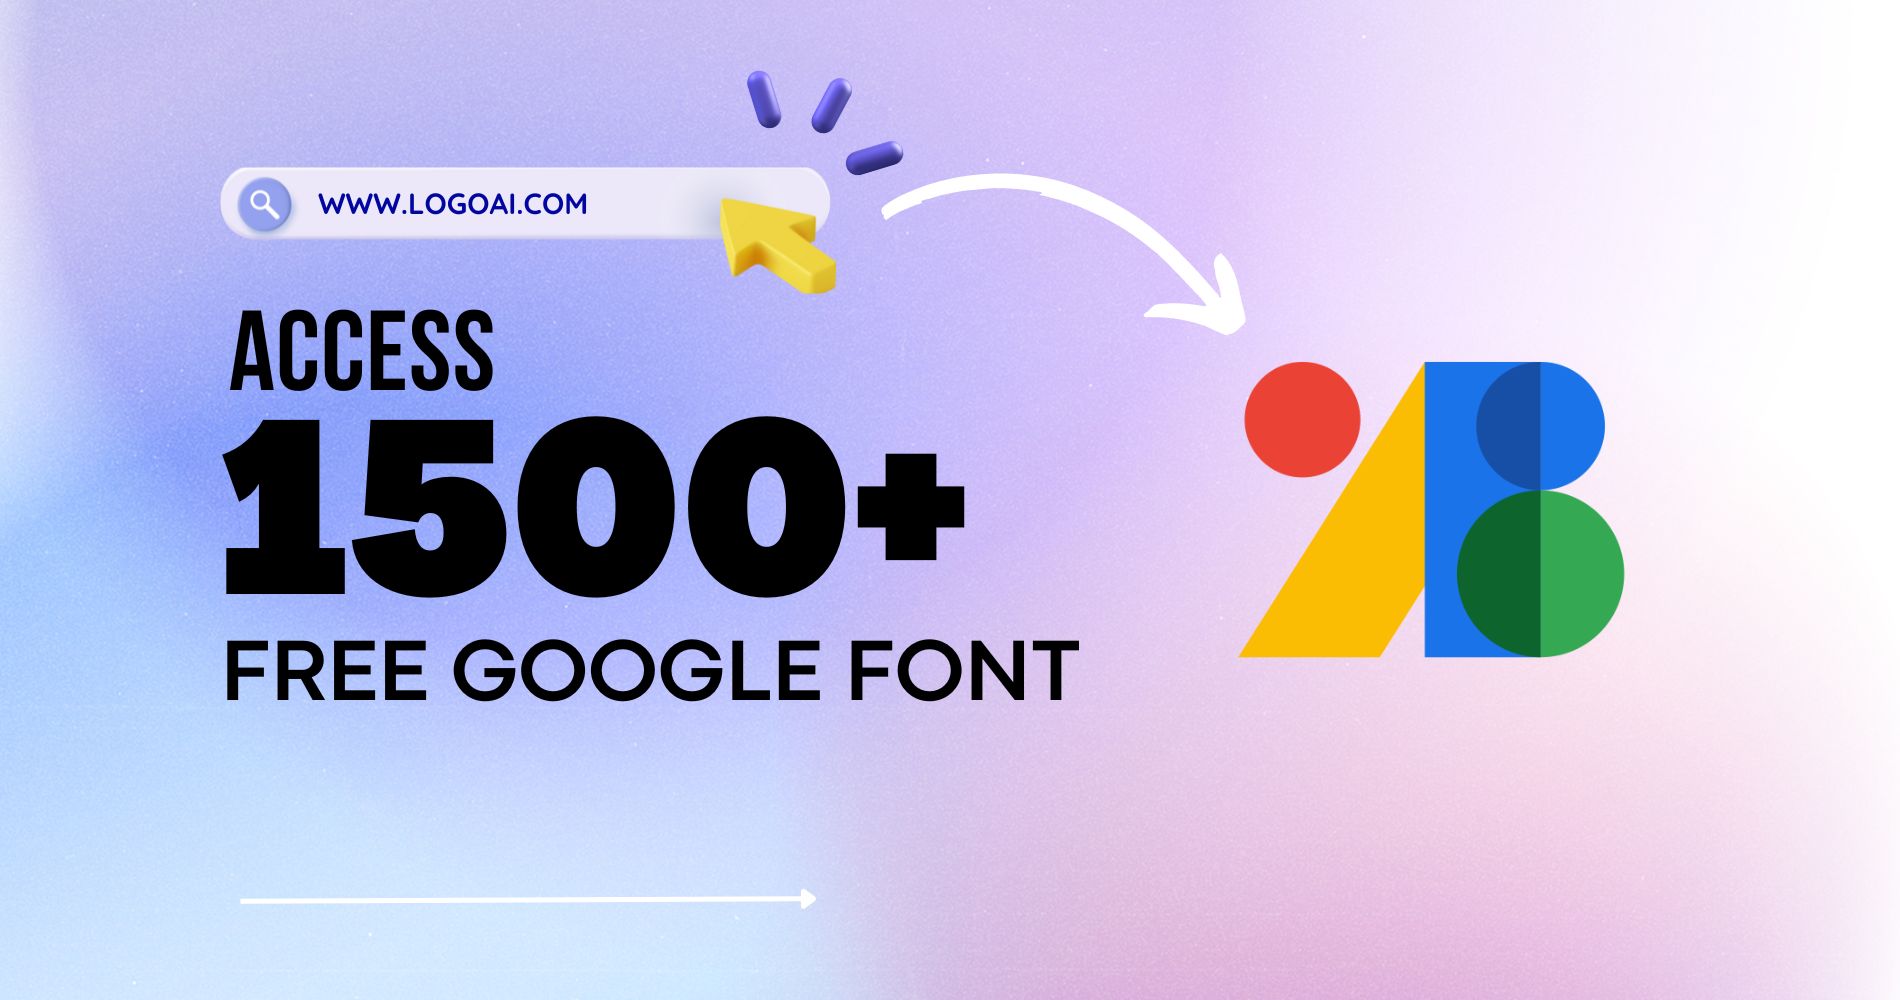 Access 1500+ Free Google Fonts for your logo design